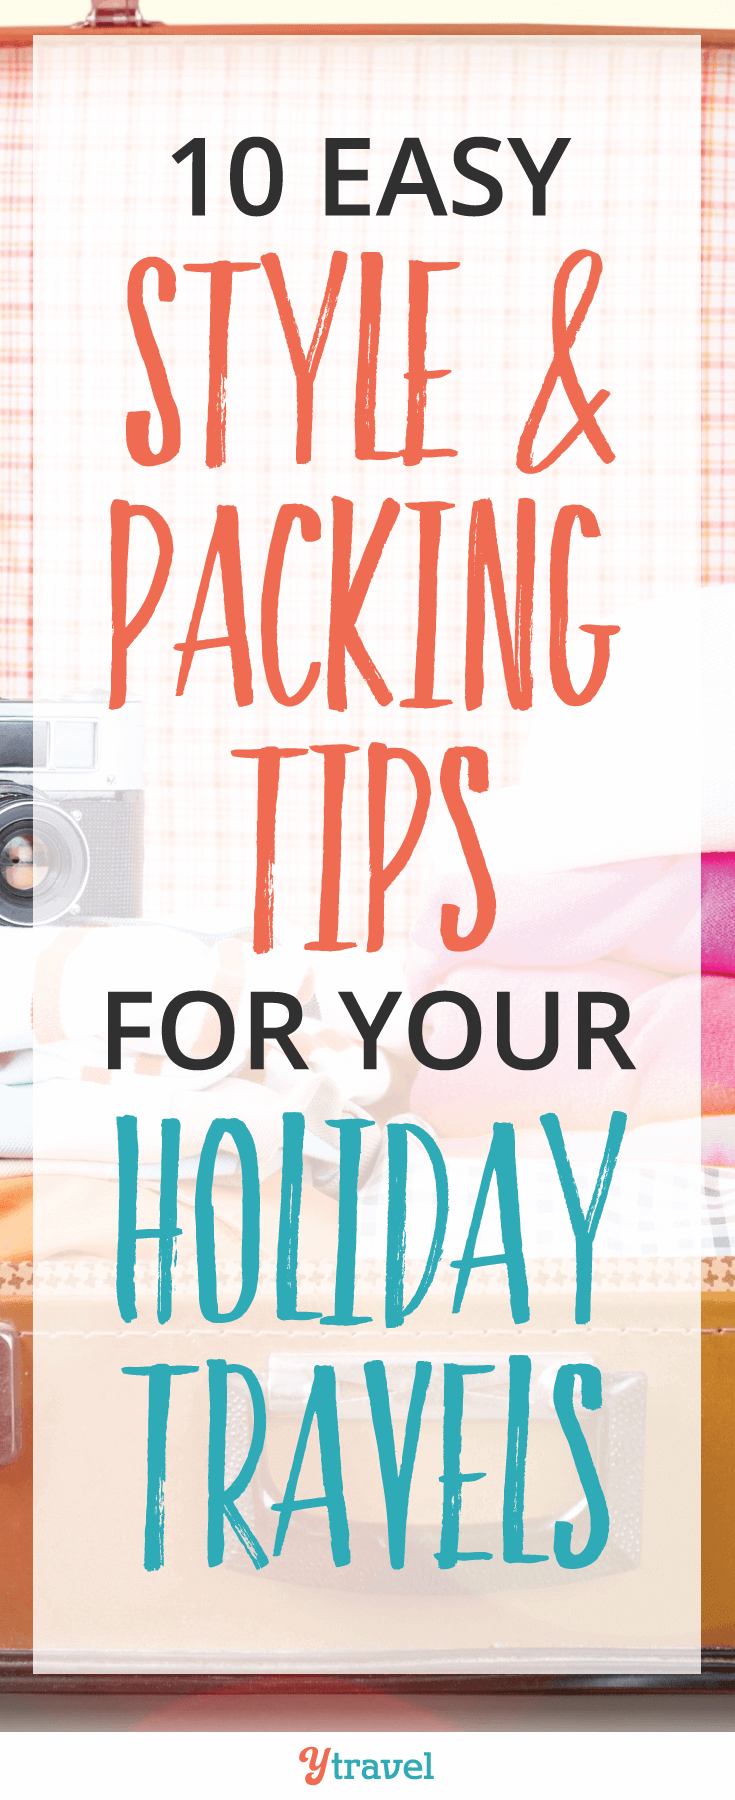 The best packing tips for your holiday travels in 10 easy steps! Make a packing list in order to bring the essentials and leave behind the unnecessary.